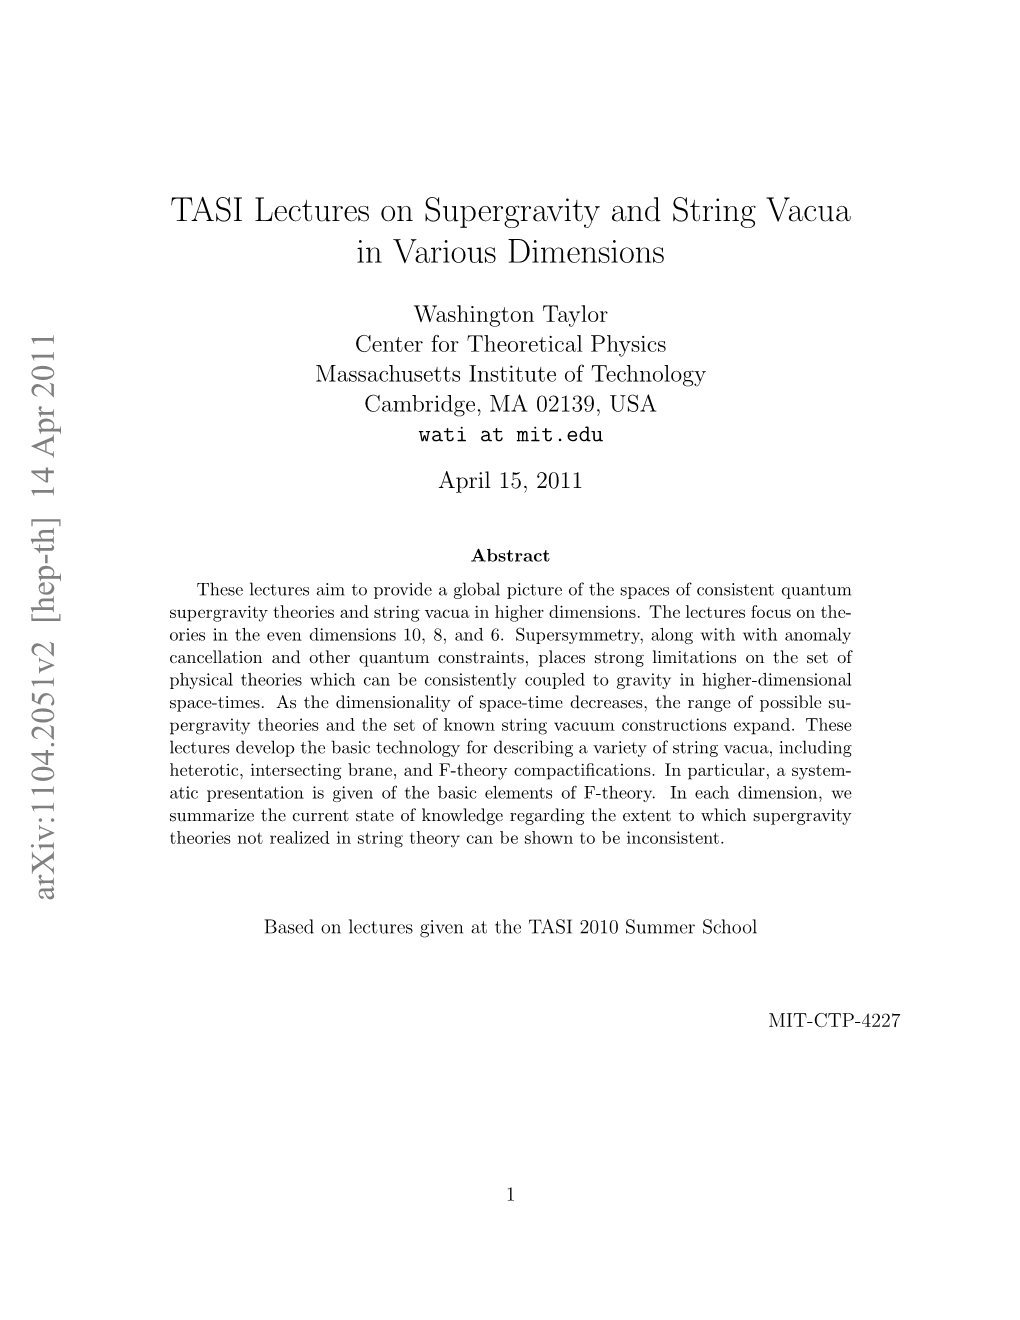 TASI Lectures on Supergravity and String Vacua in Various Dimensions